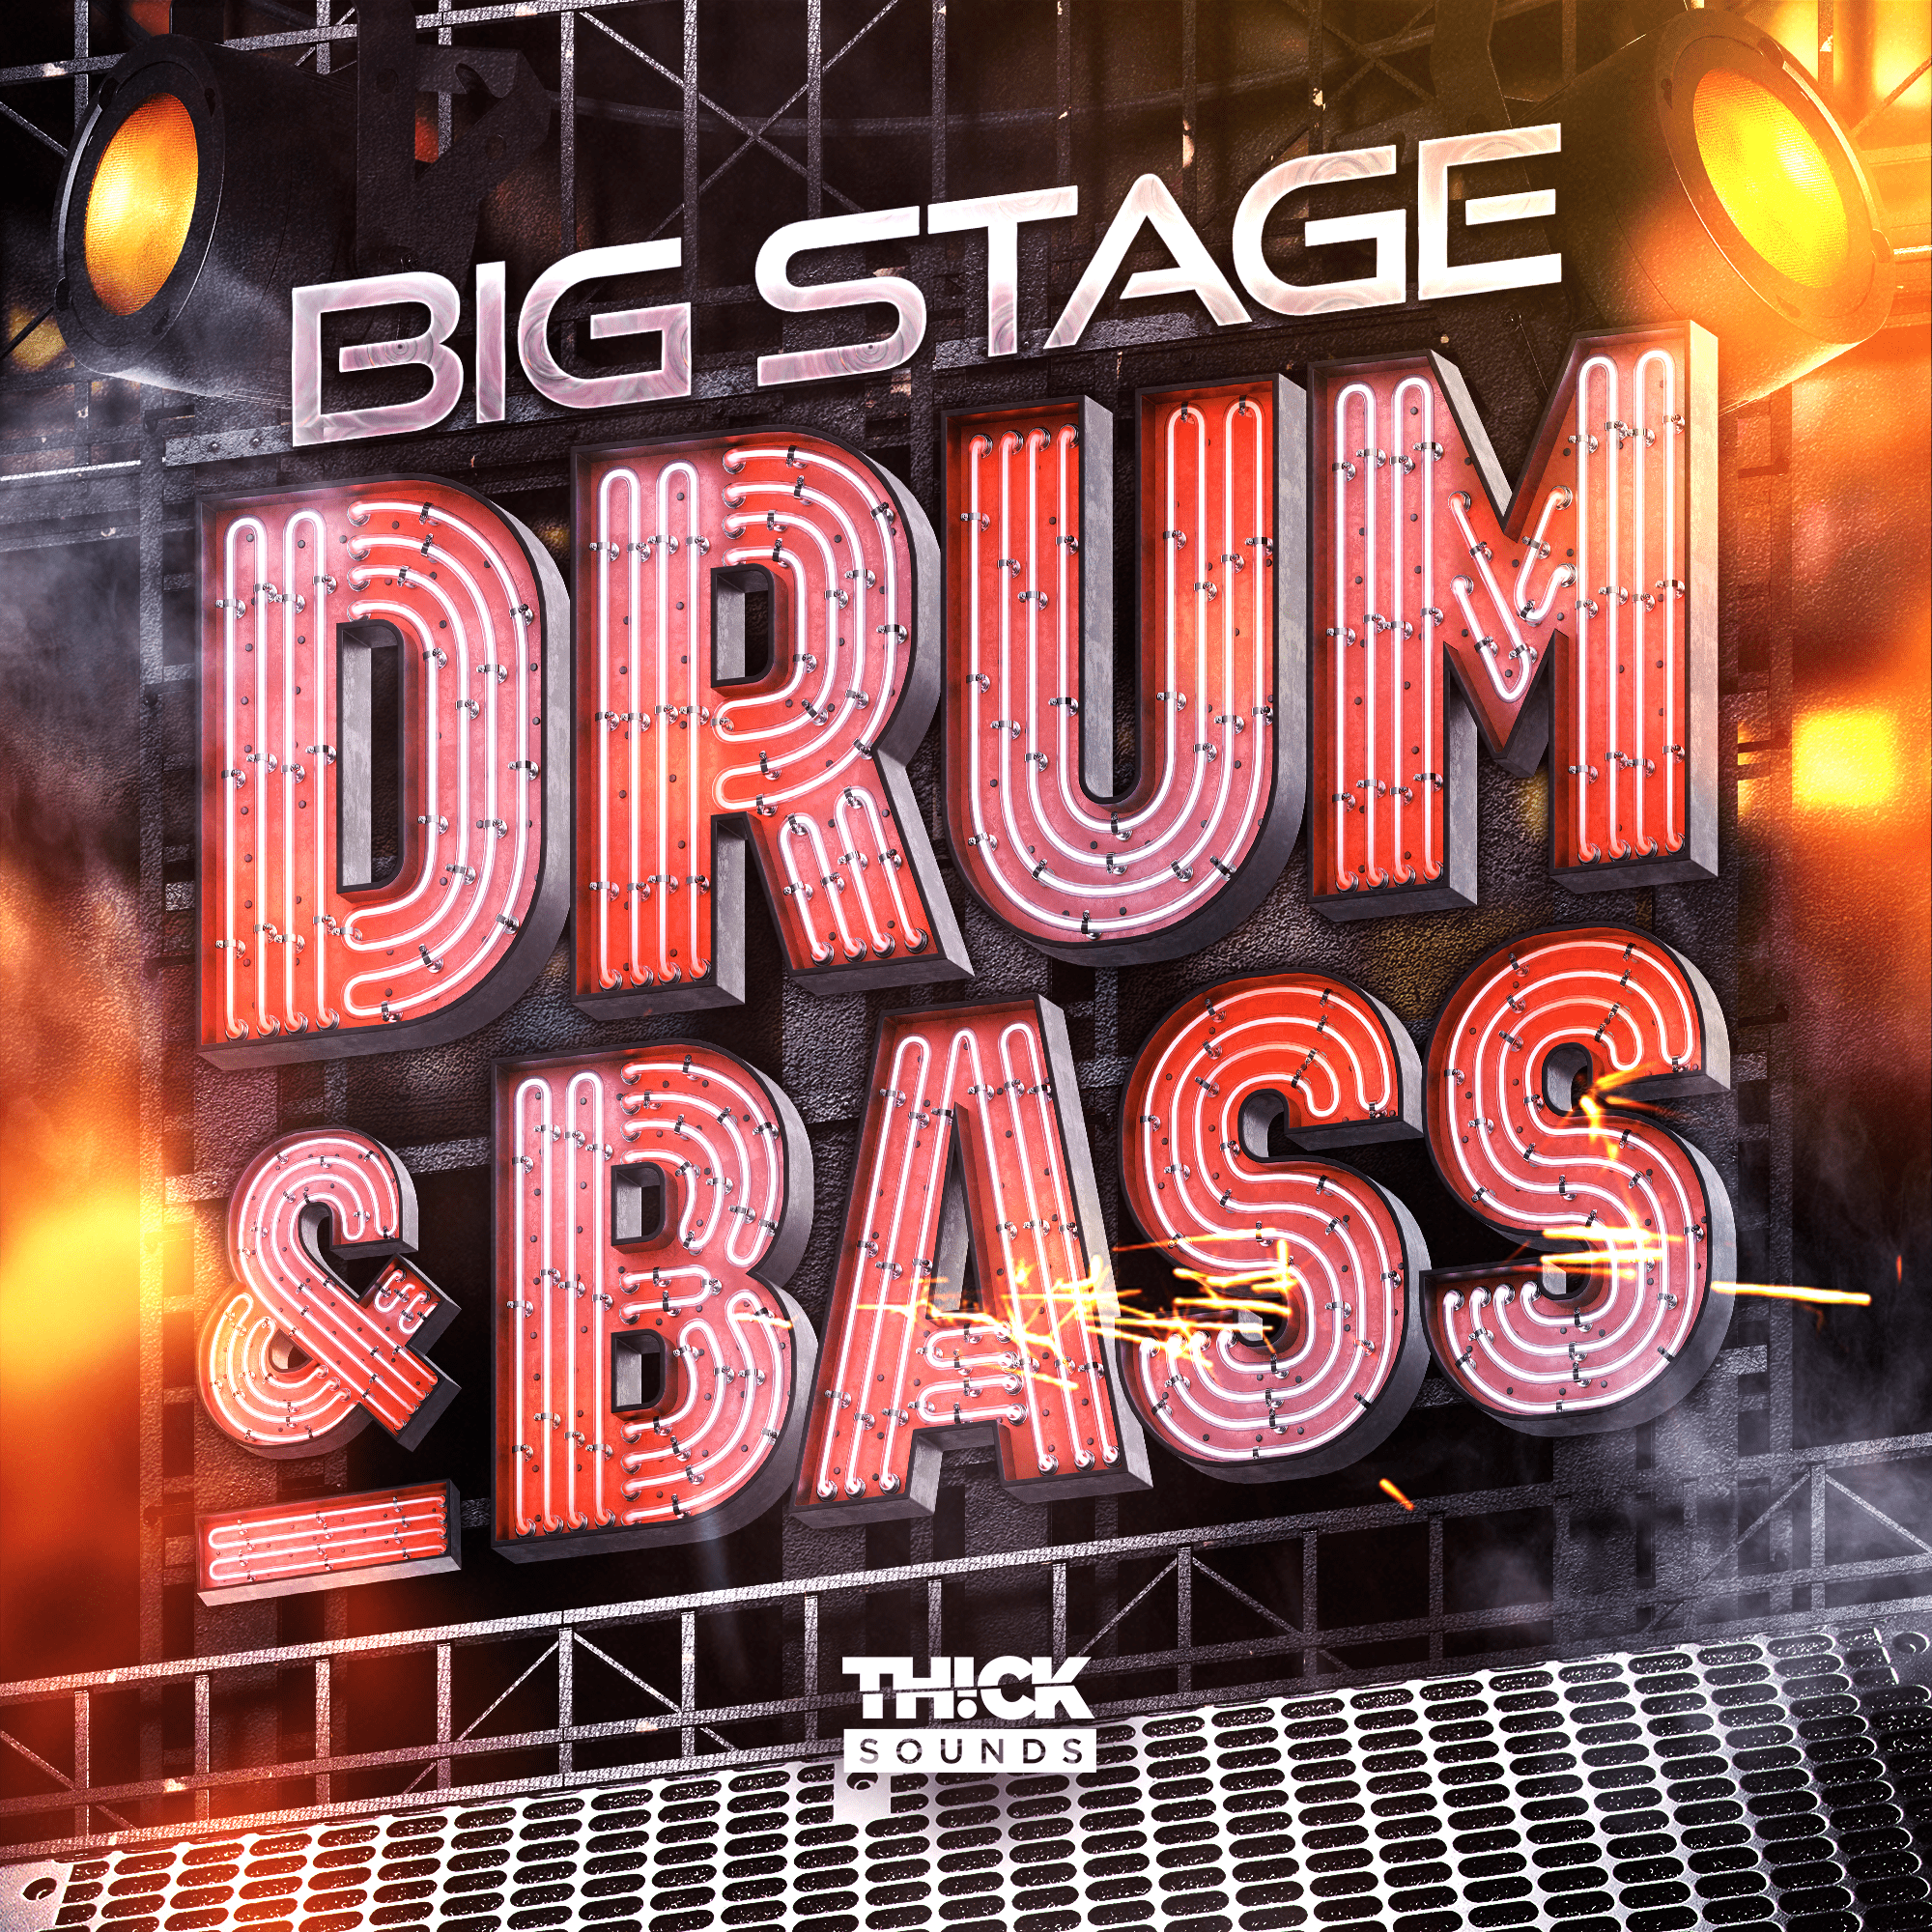 Big Stage Drum & Bass by THICK SOUNDS